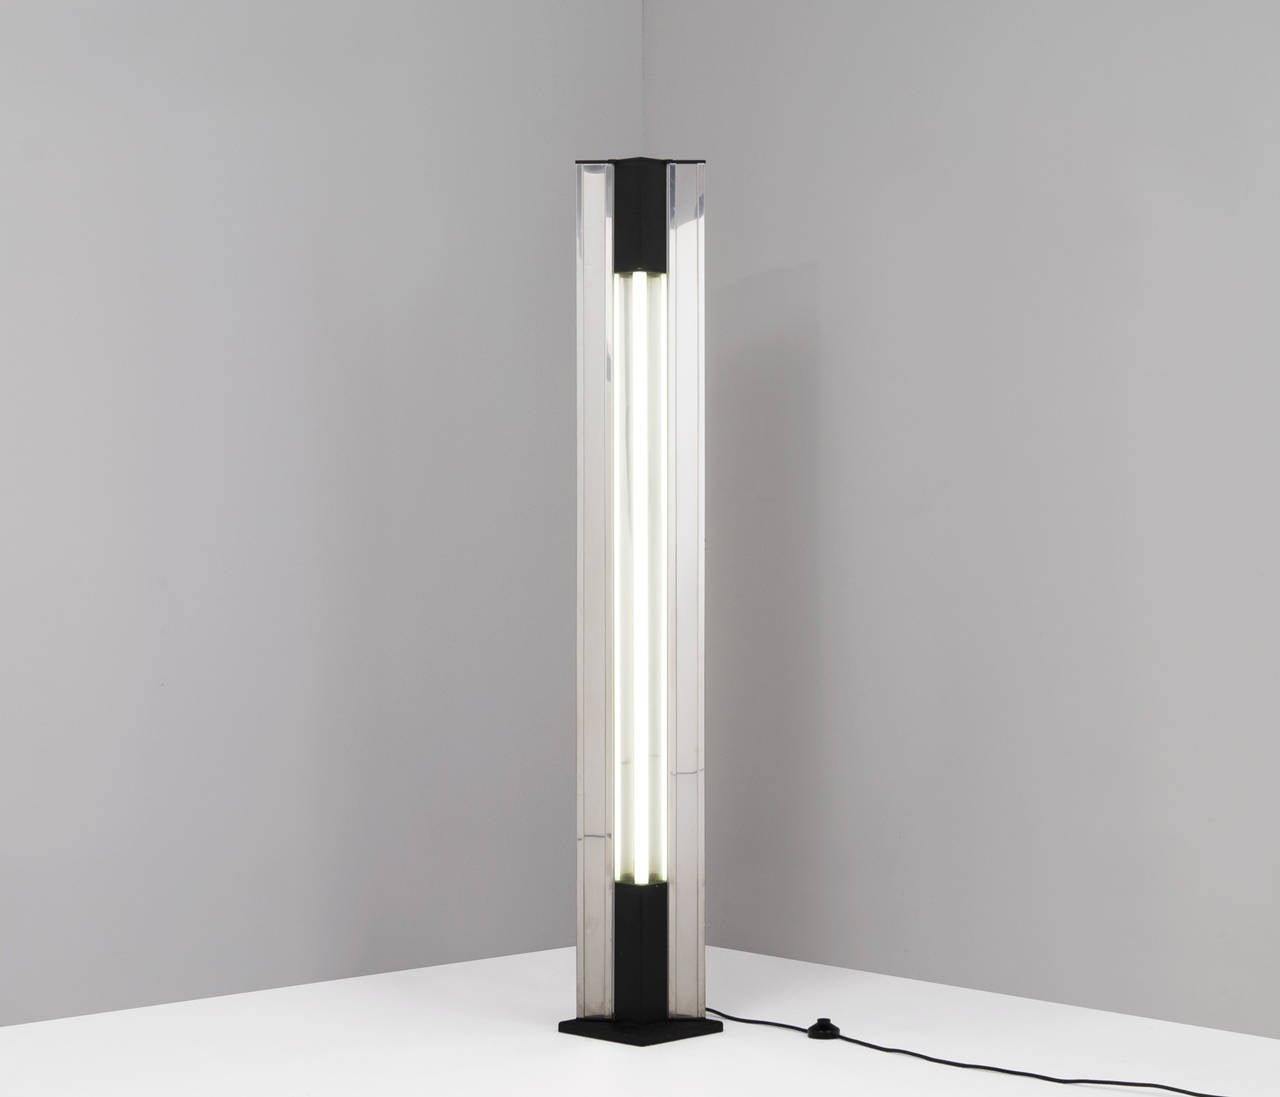 Rare Moonlight floor lamp, designed by Ettore Sottsass in Italy, circa 1970.

This basic shaped floor lamp shines a very interesting and atmospheric light. Due to the vertical thin lines in the metal fixture, the diffuse light on its surrounding